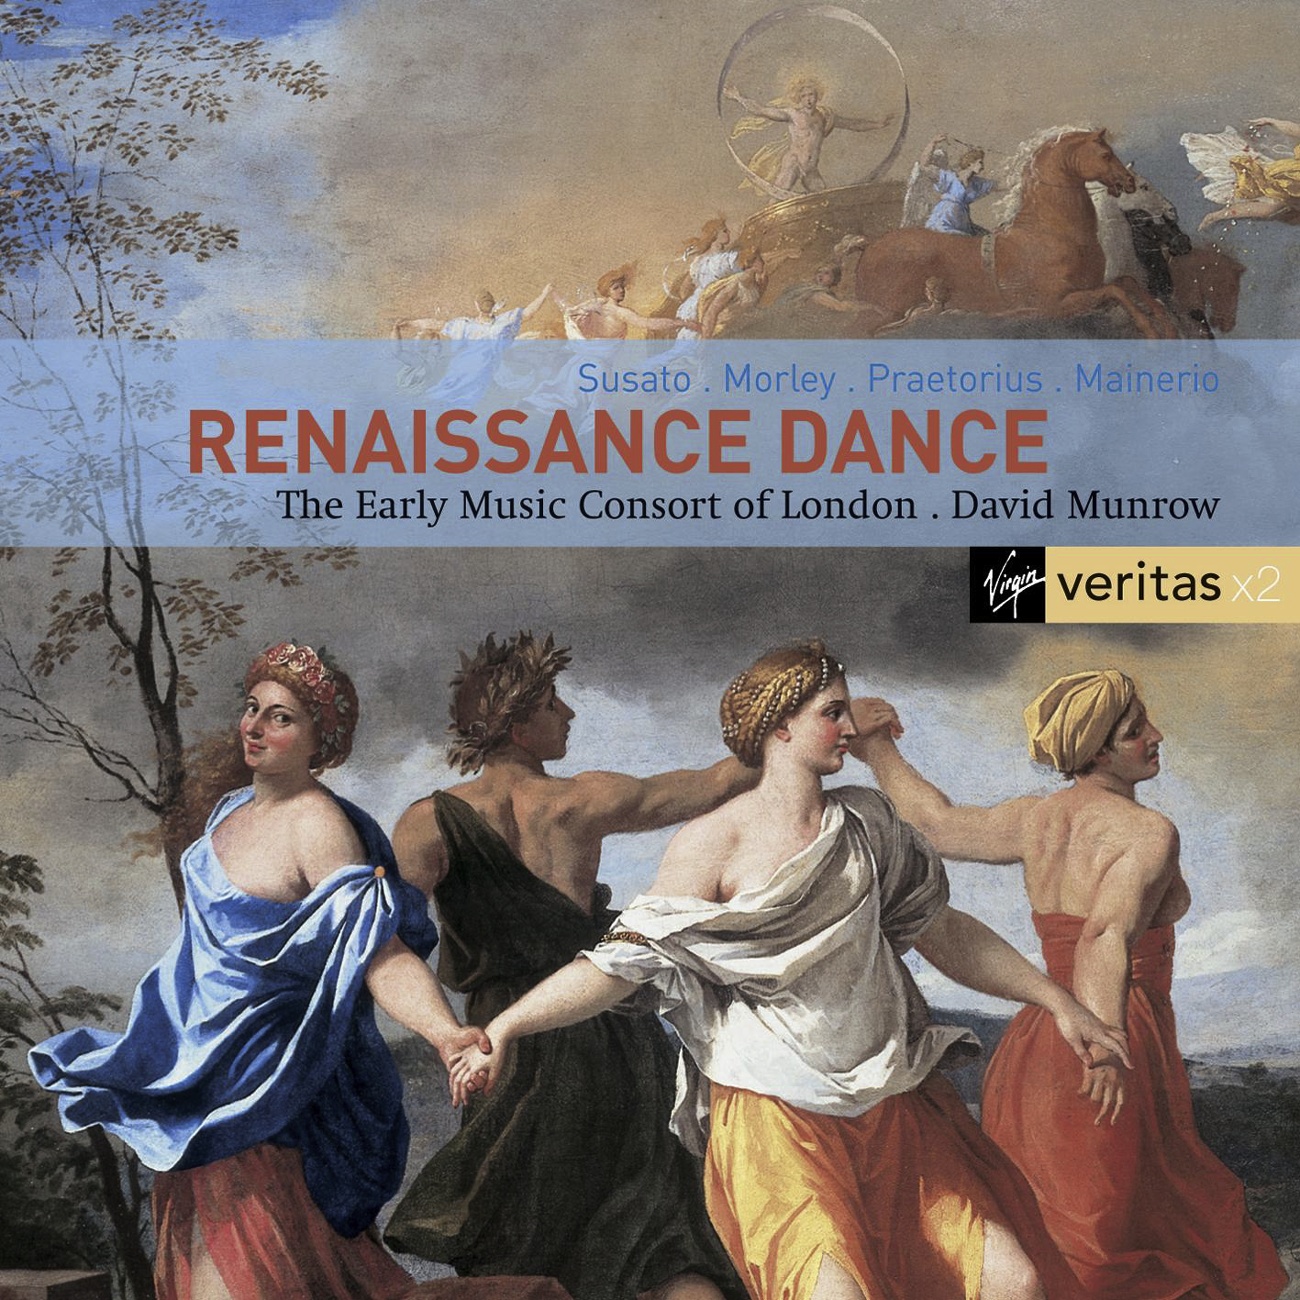 Dances from Broken Consort from Thomas Morley/ First Book of Consort (2005 Digital Remaster): Captaine Piper's Pavan and Gaillard (Dowland)